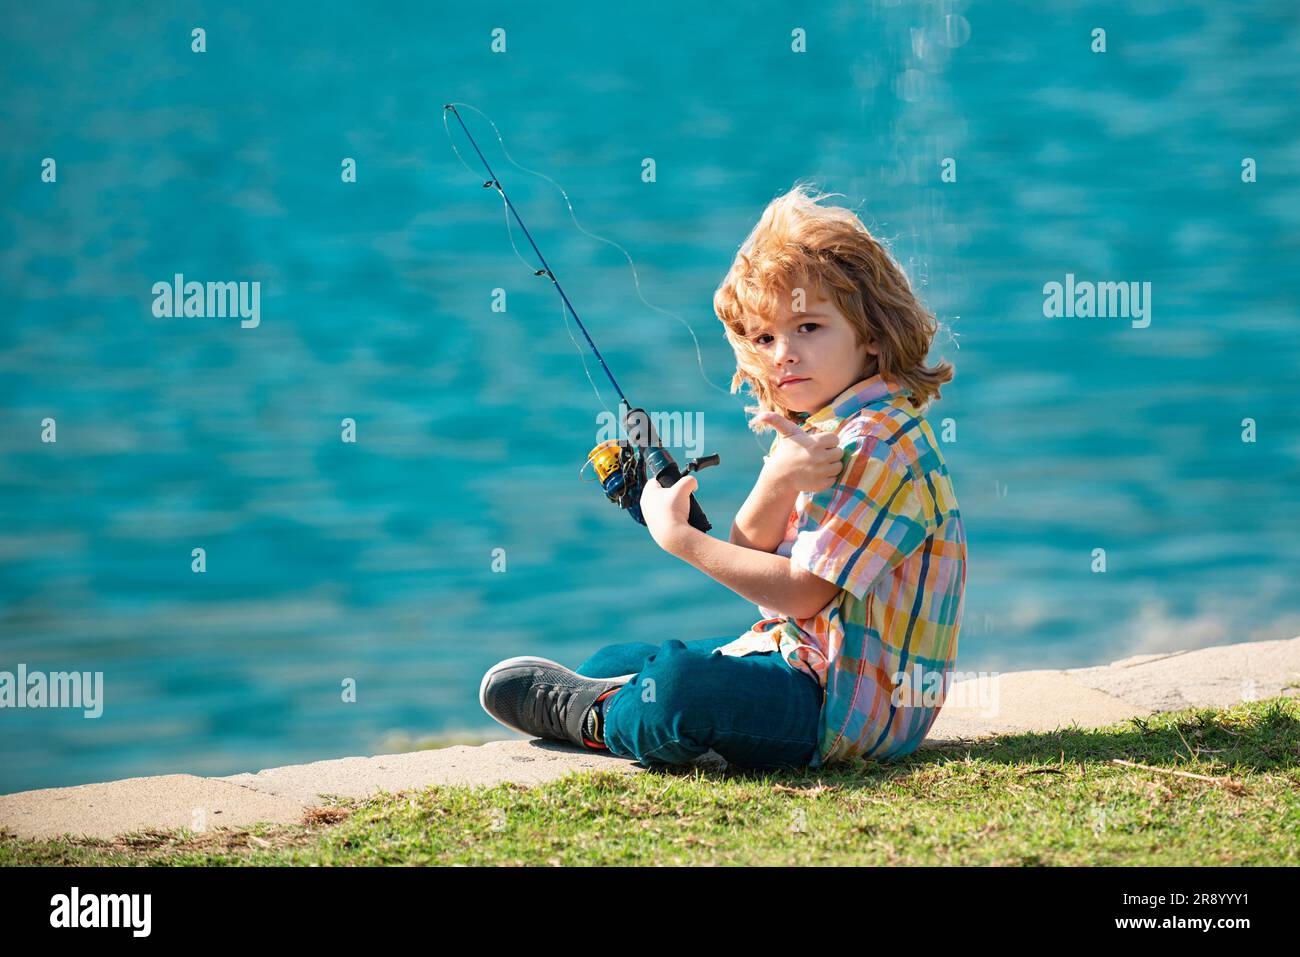 Fishing concept. Child fishing on the lake. Young fisher. Boy with